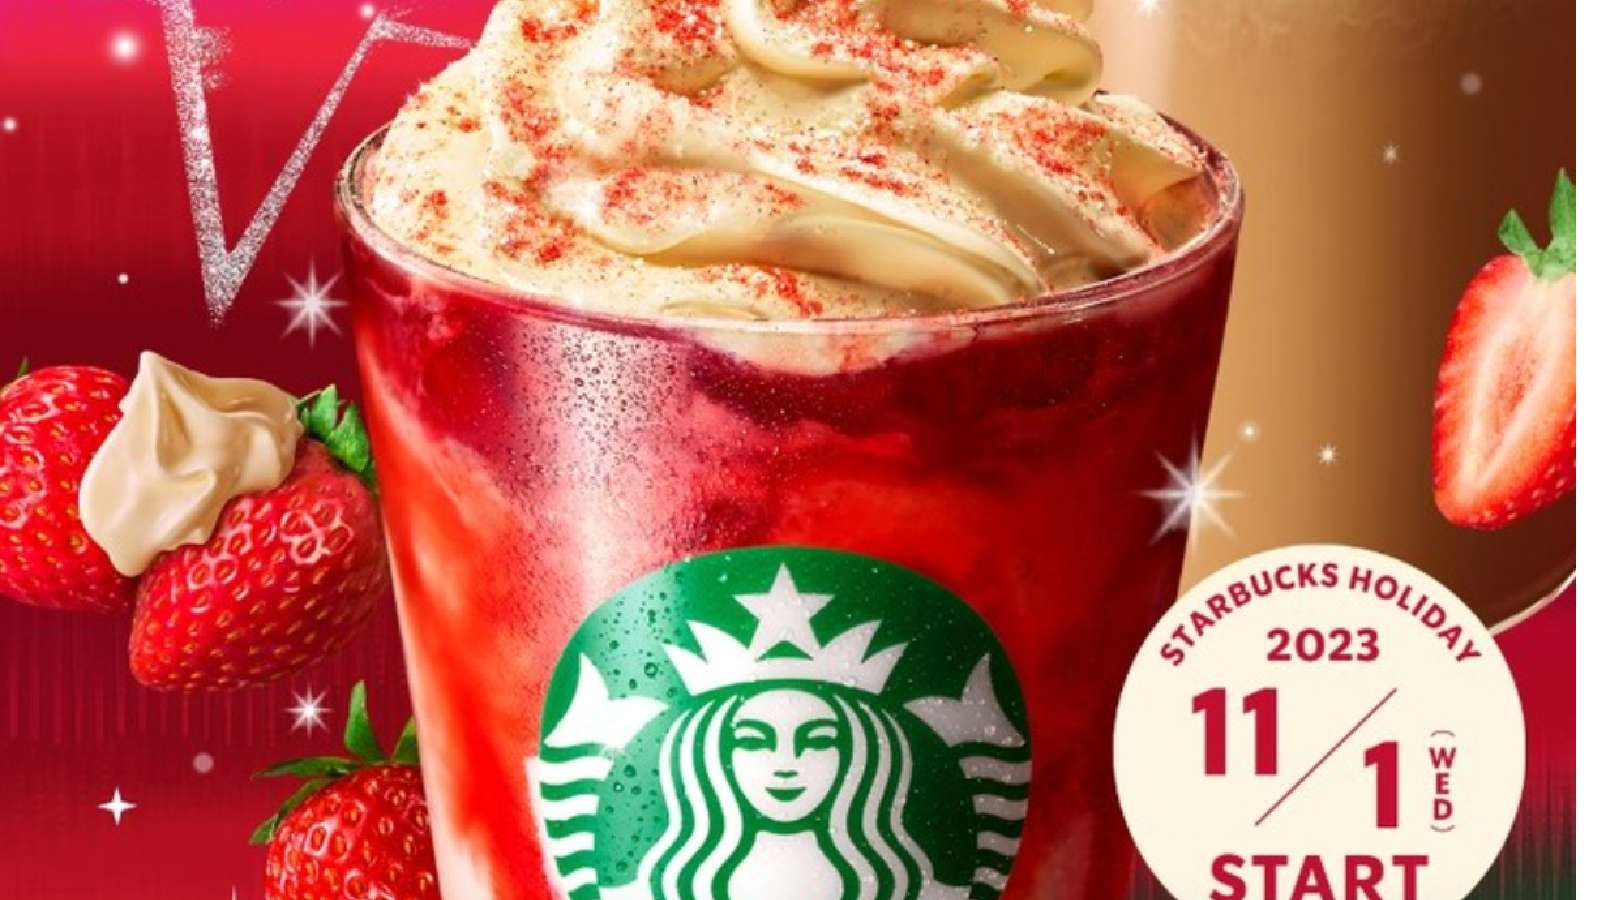 Image shows new Stawberry Merry Cream by Starbucks.